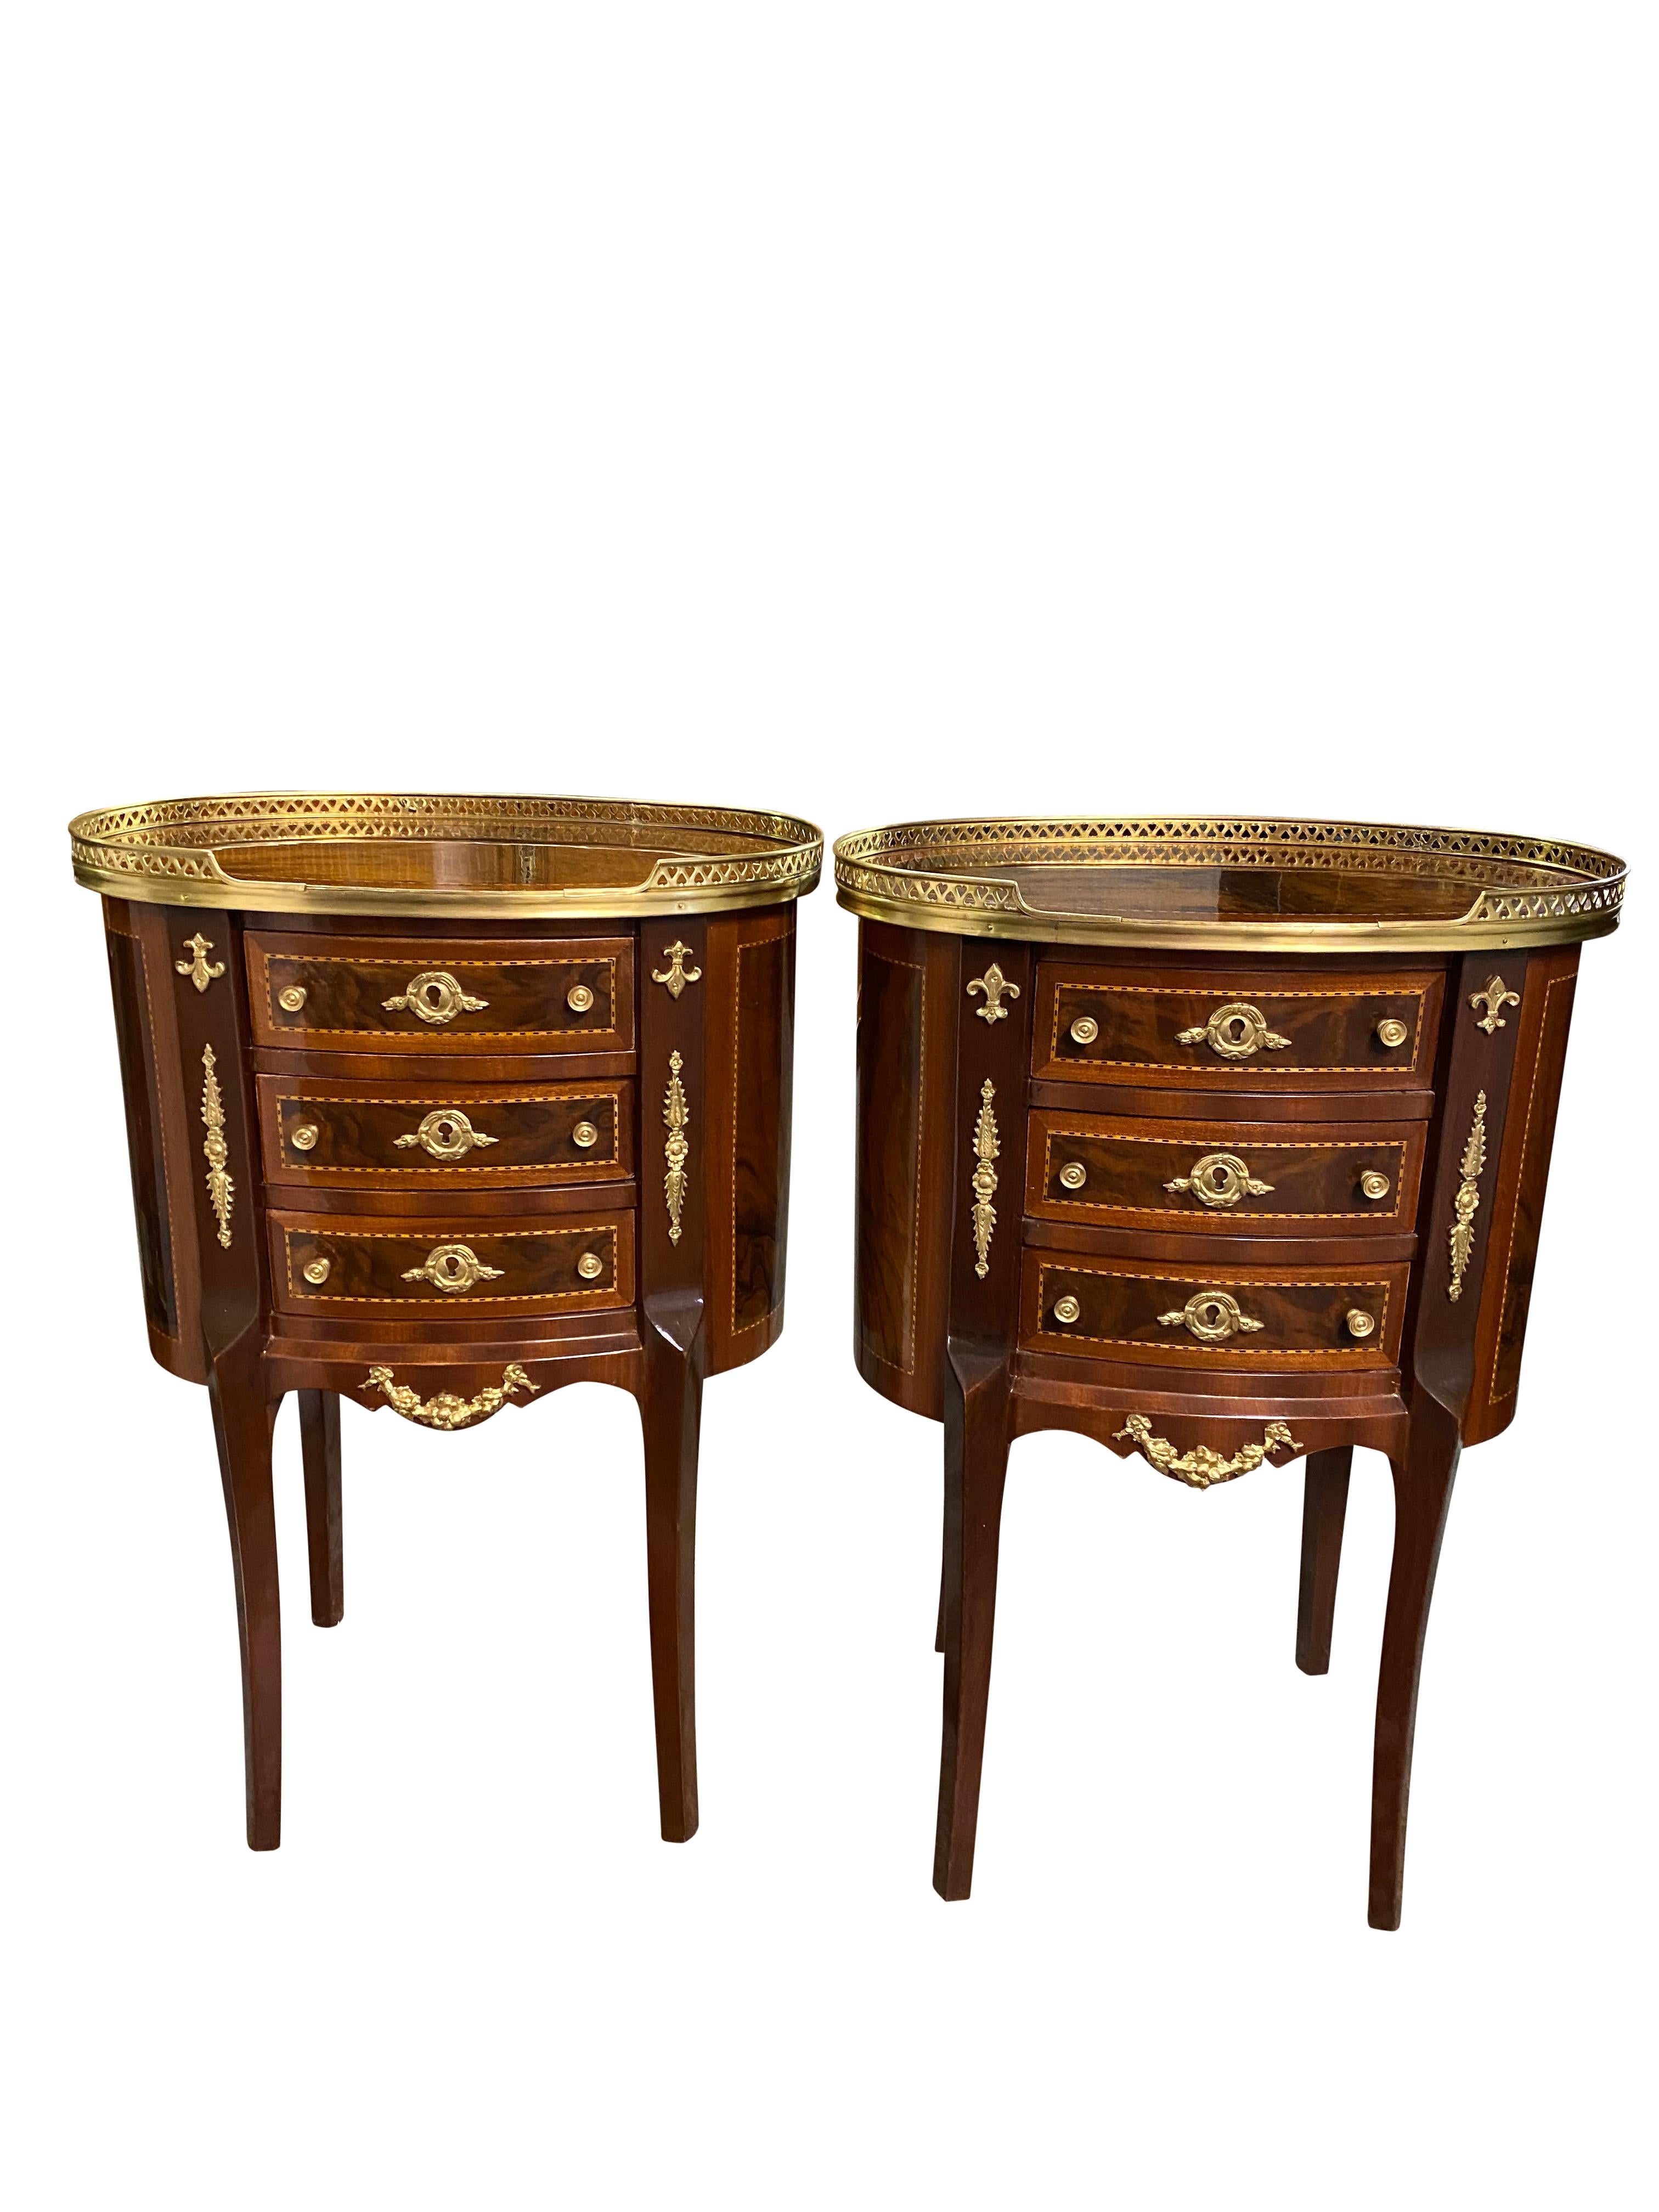 A stunning pair of 20th century English Regency style side tables. A gorgeous and elegant design perfect for modern interiors.